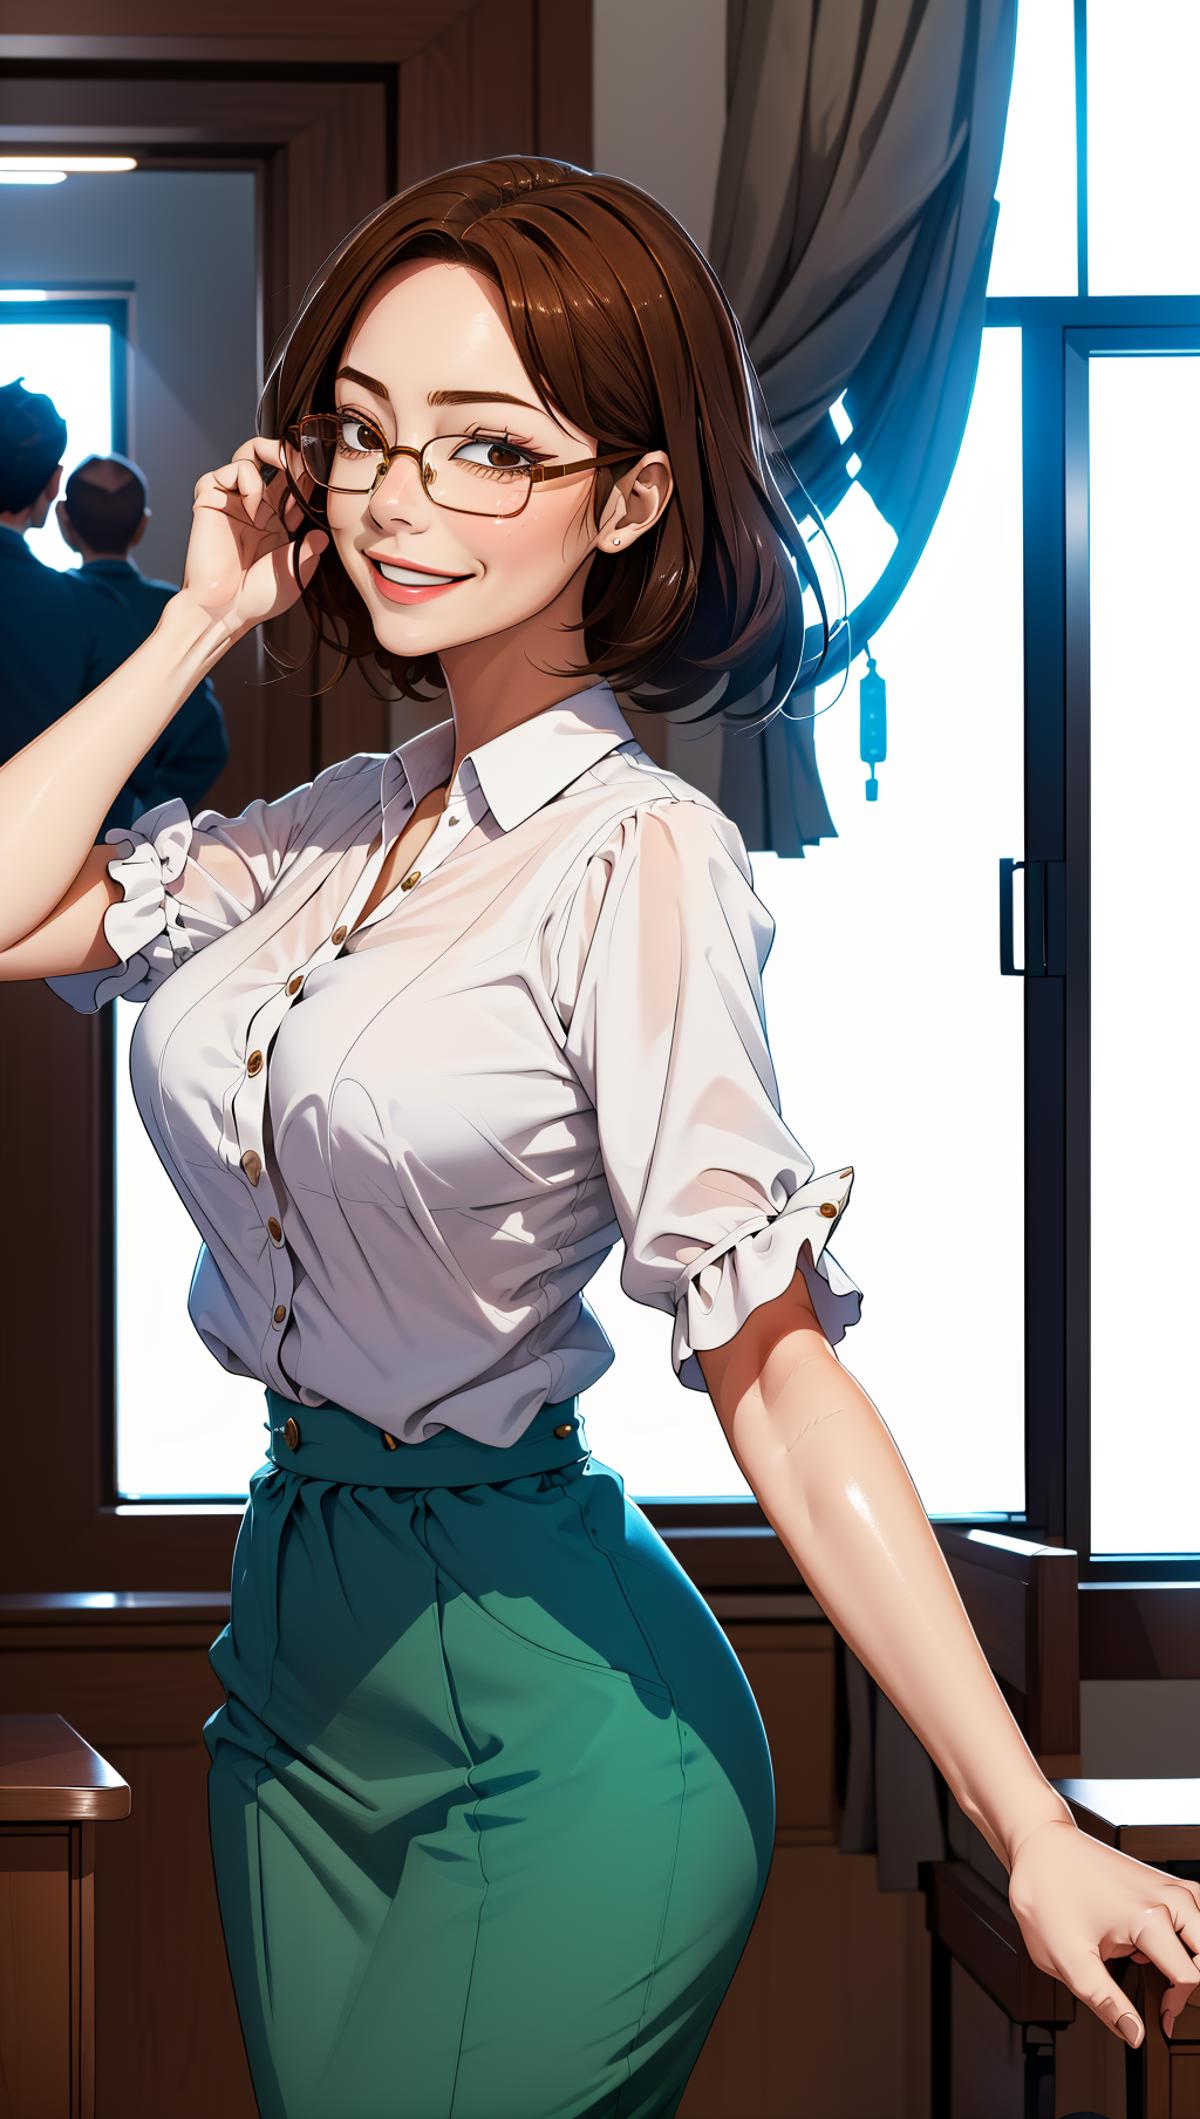 A cartoon illustration of a woman in a white shirt and green skirt, wearing glasses and holding her phone to her ear.